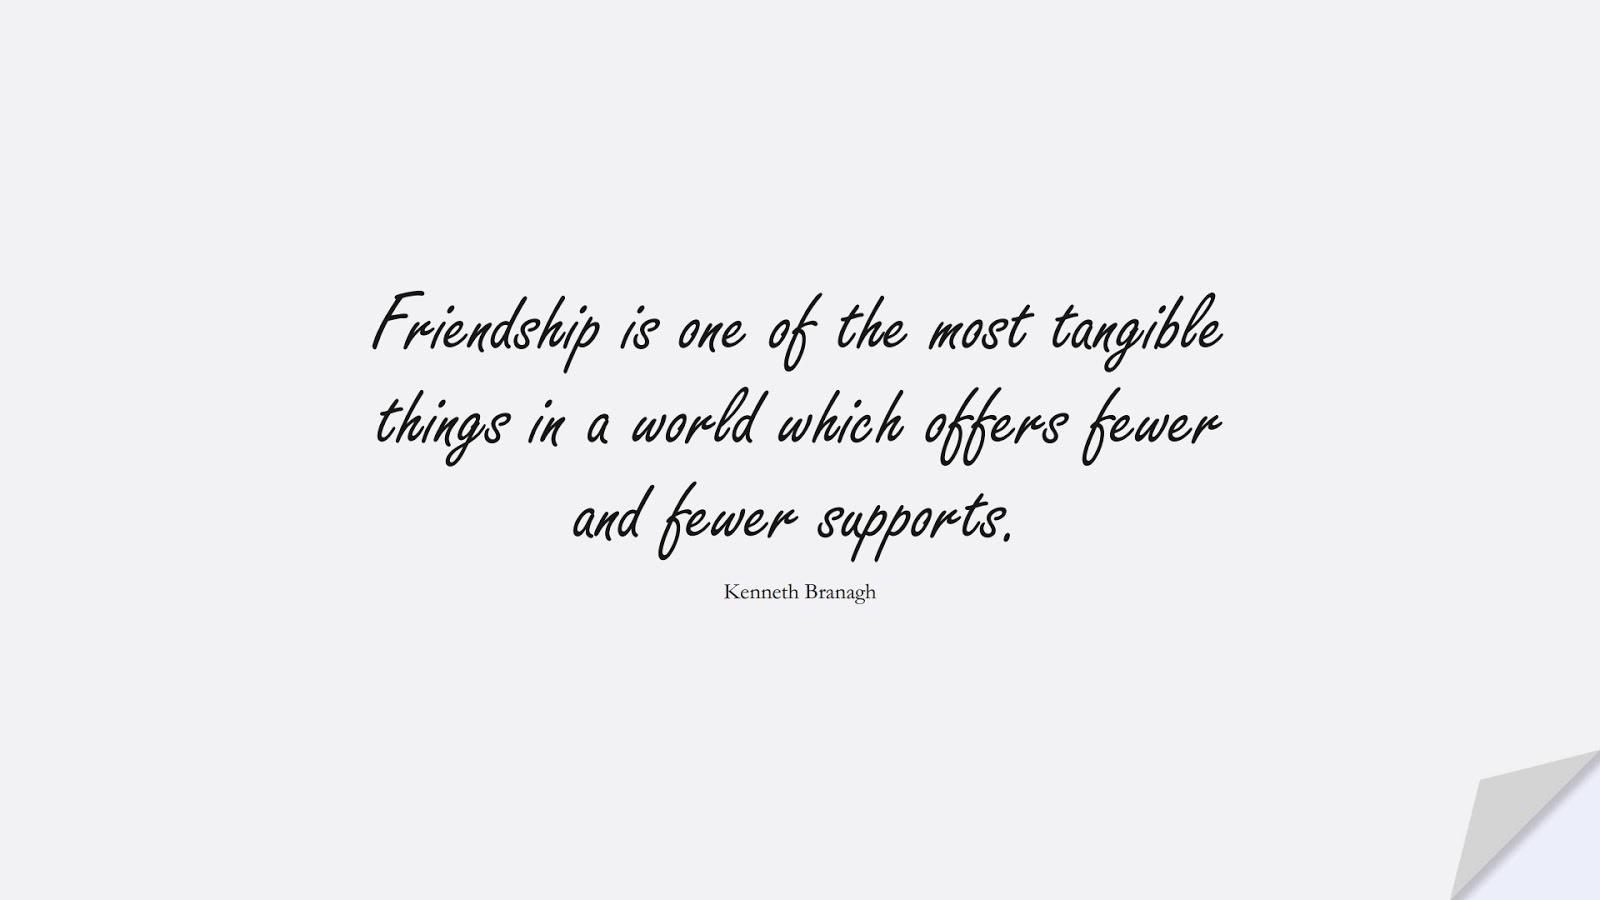 Friendship is one of the most tangible things in a world which offers fewer and fewer supports. (Kenneth Branagh);  #FriendshipQuotes